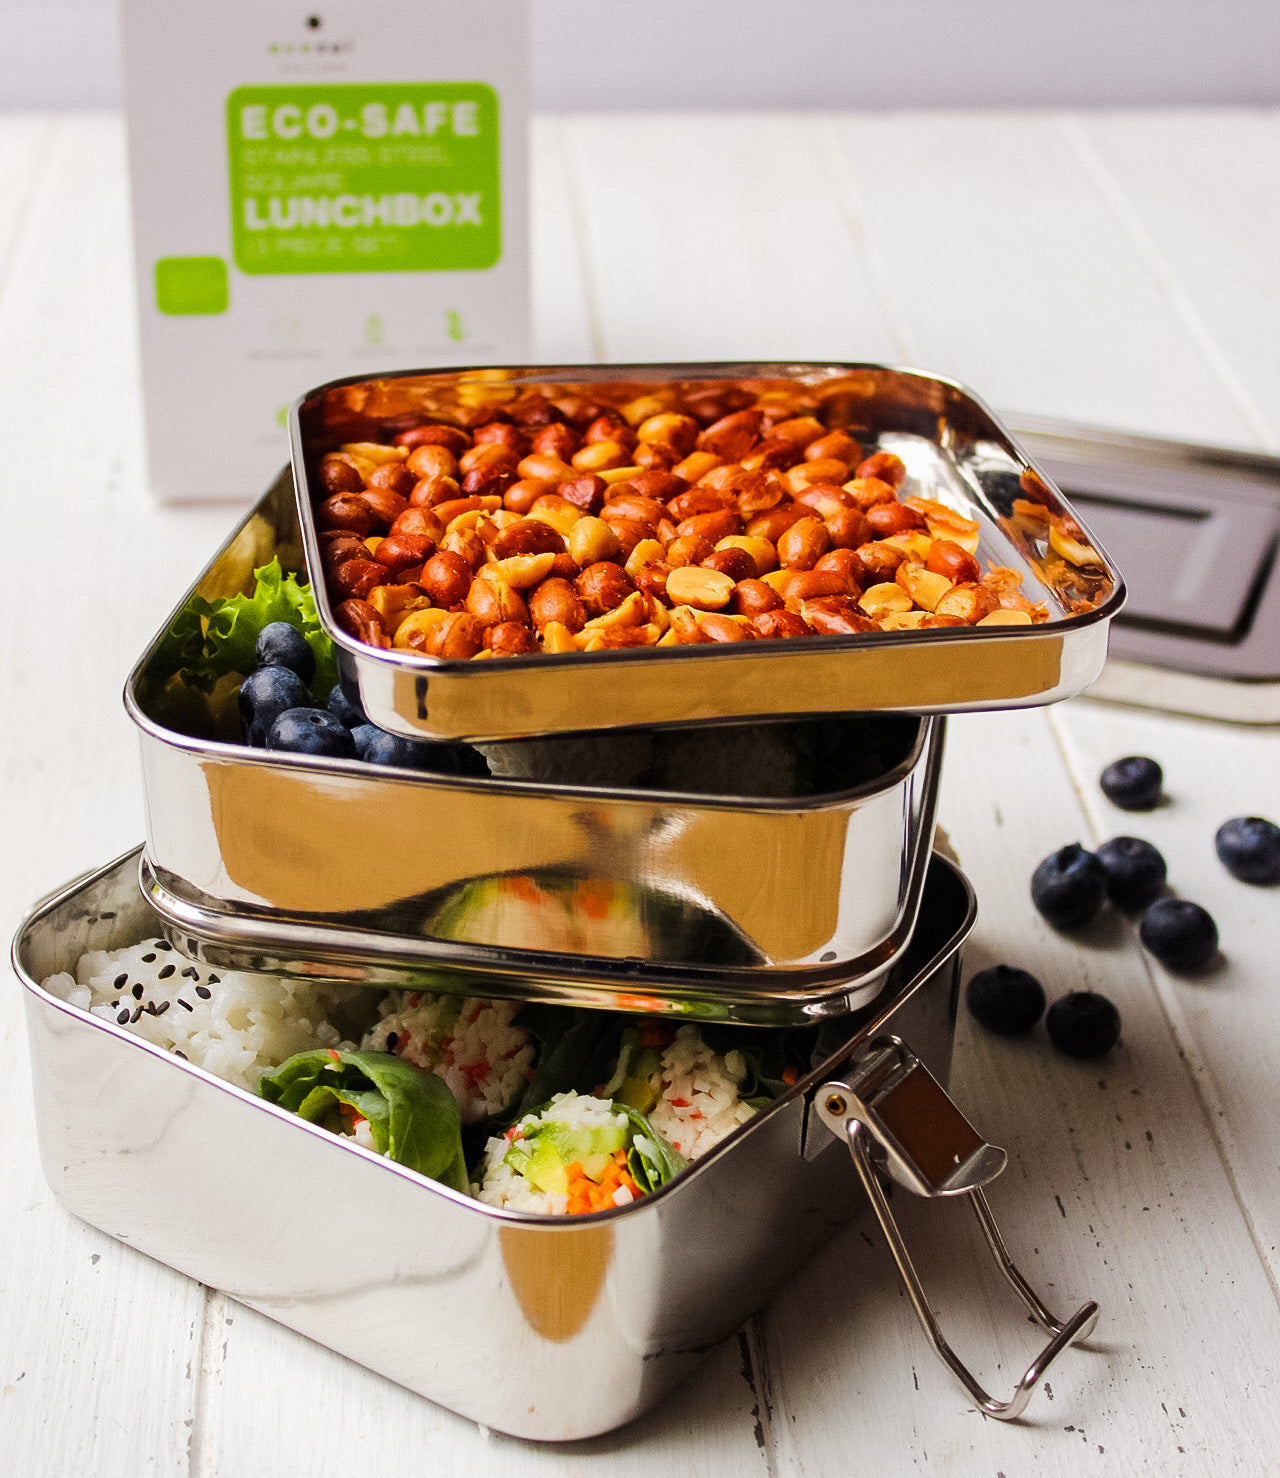 3 IN 1 Stainless Steel Eco Lunch Box